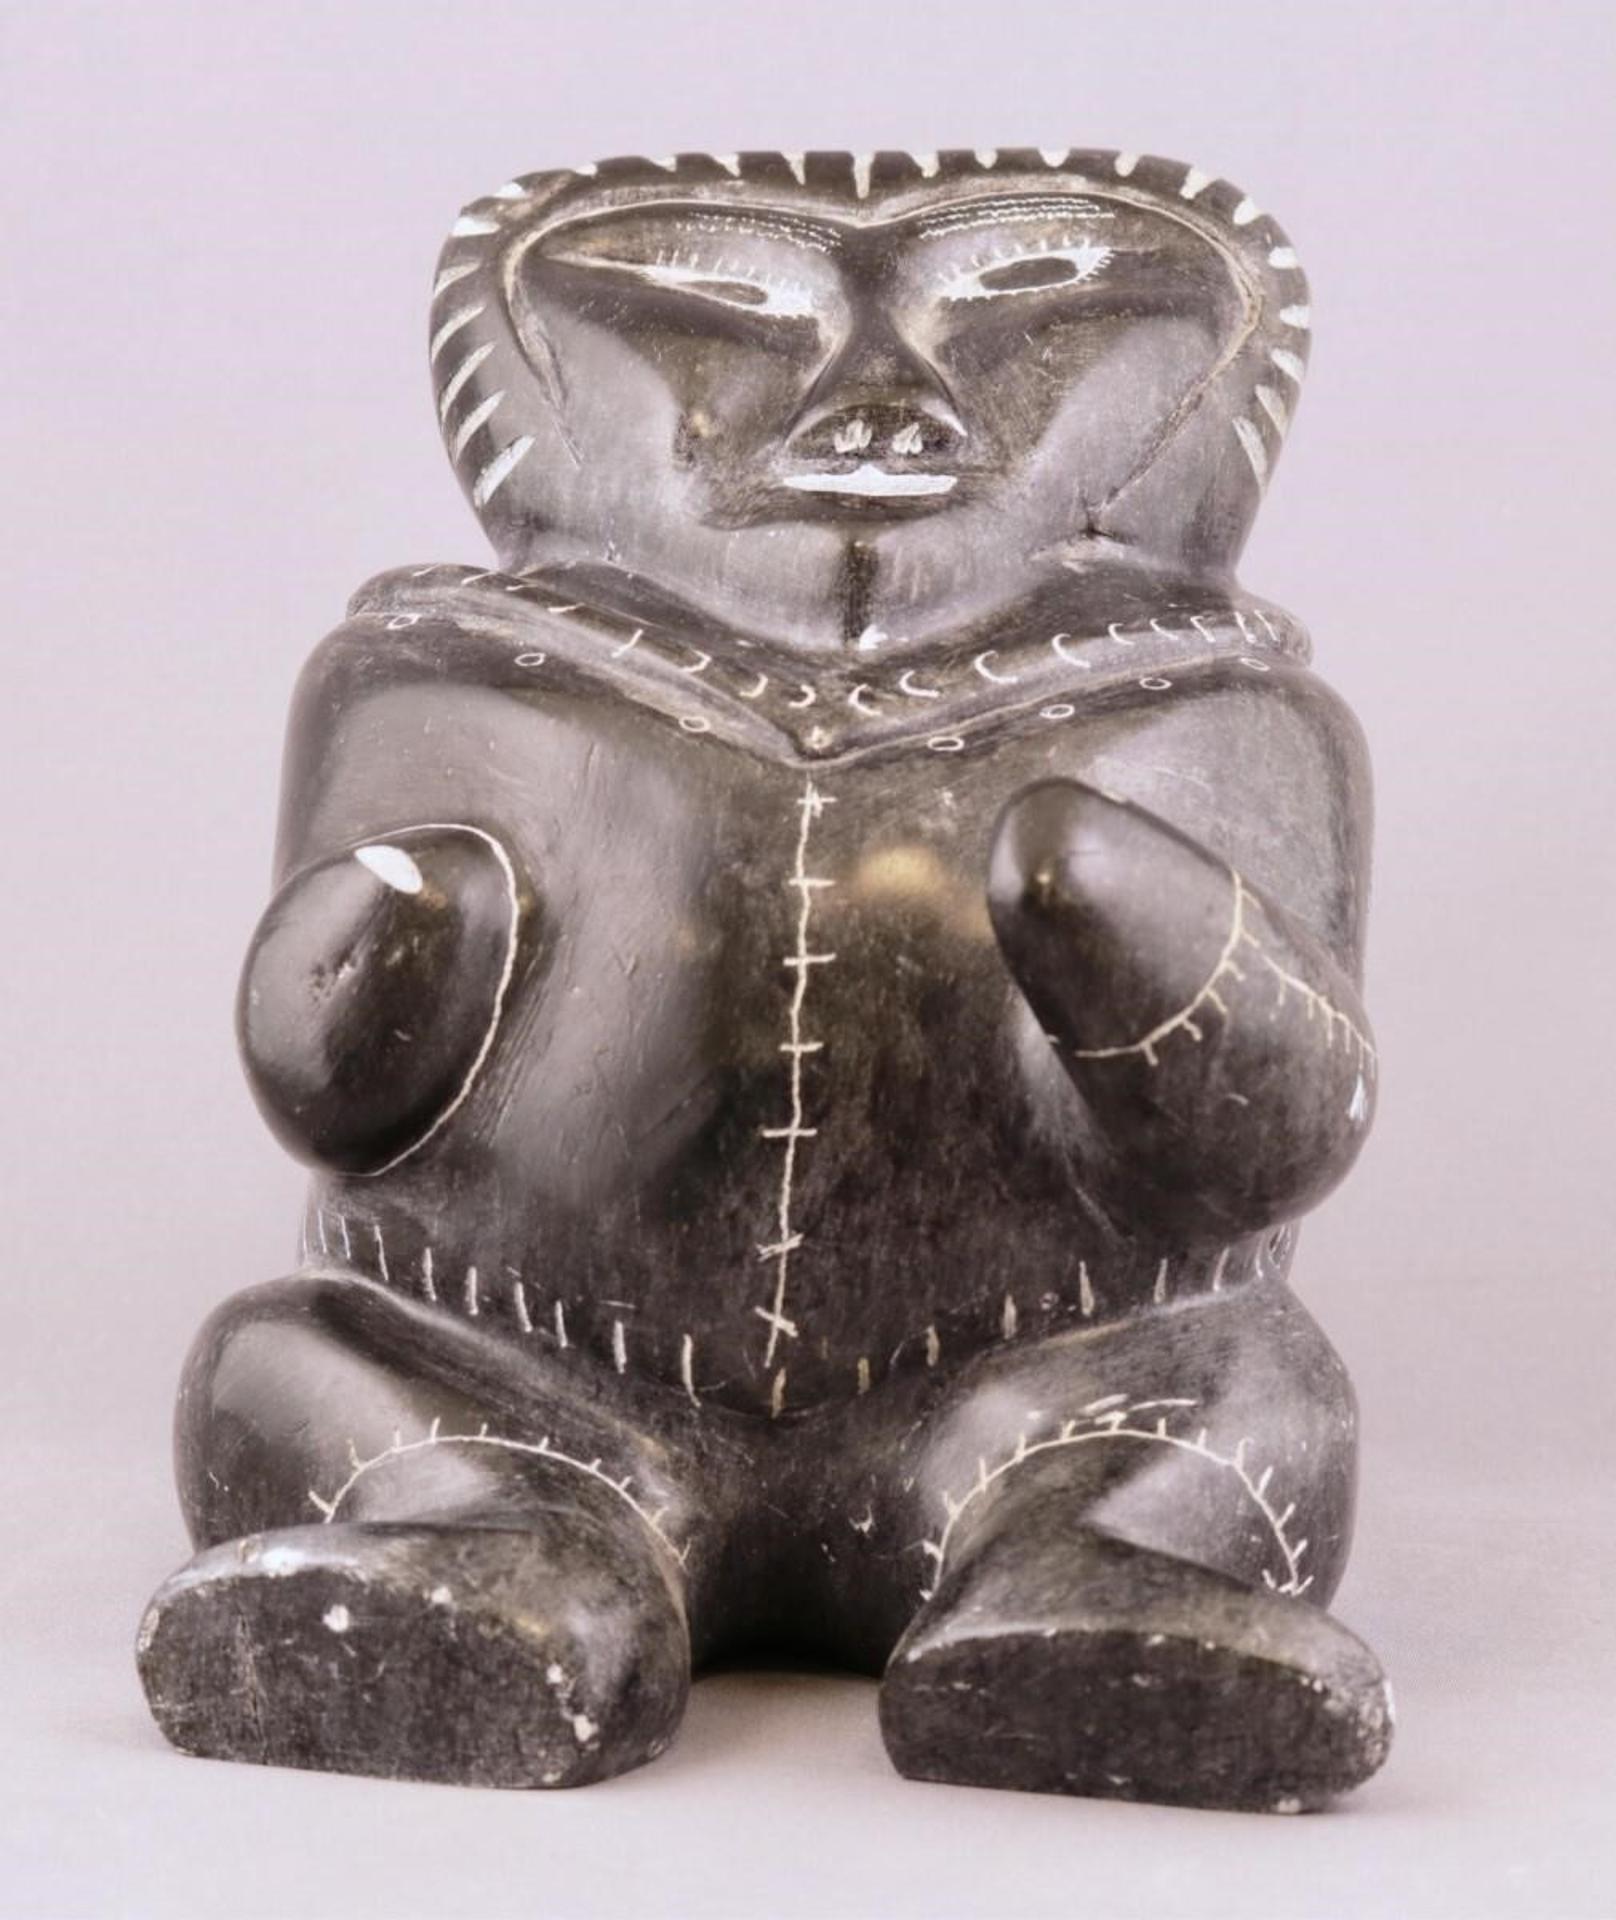 William Kawakit - a grey-black stone carving of a Seated Figure, initialed and inscribed with region